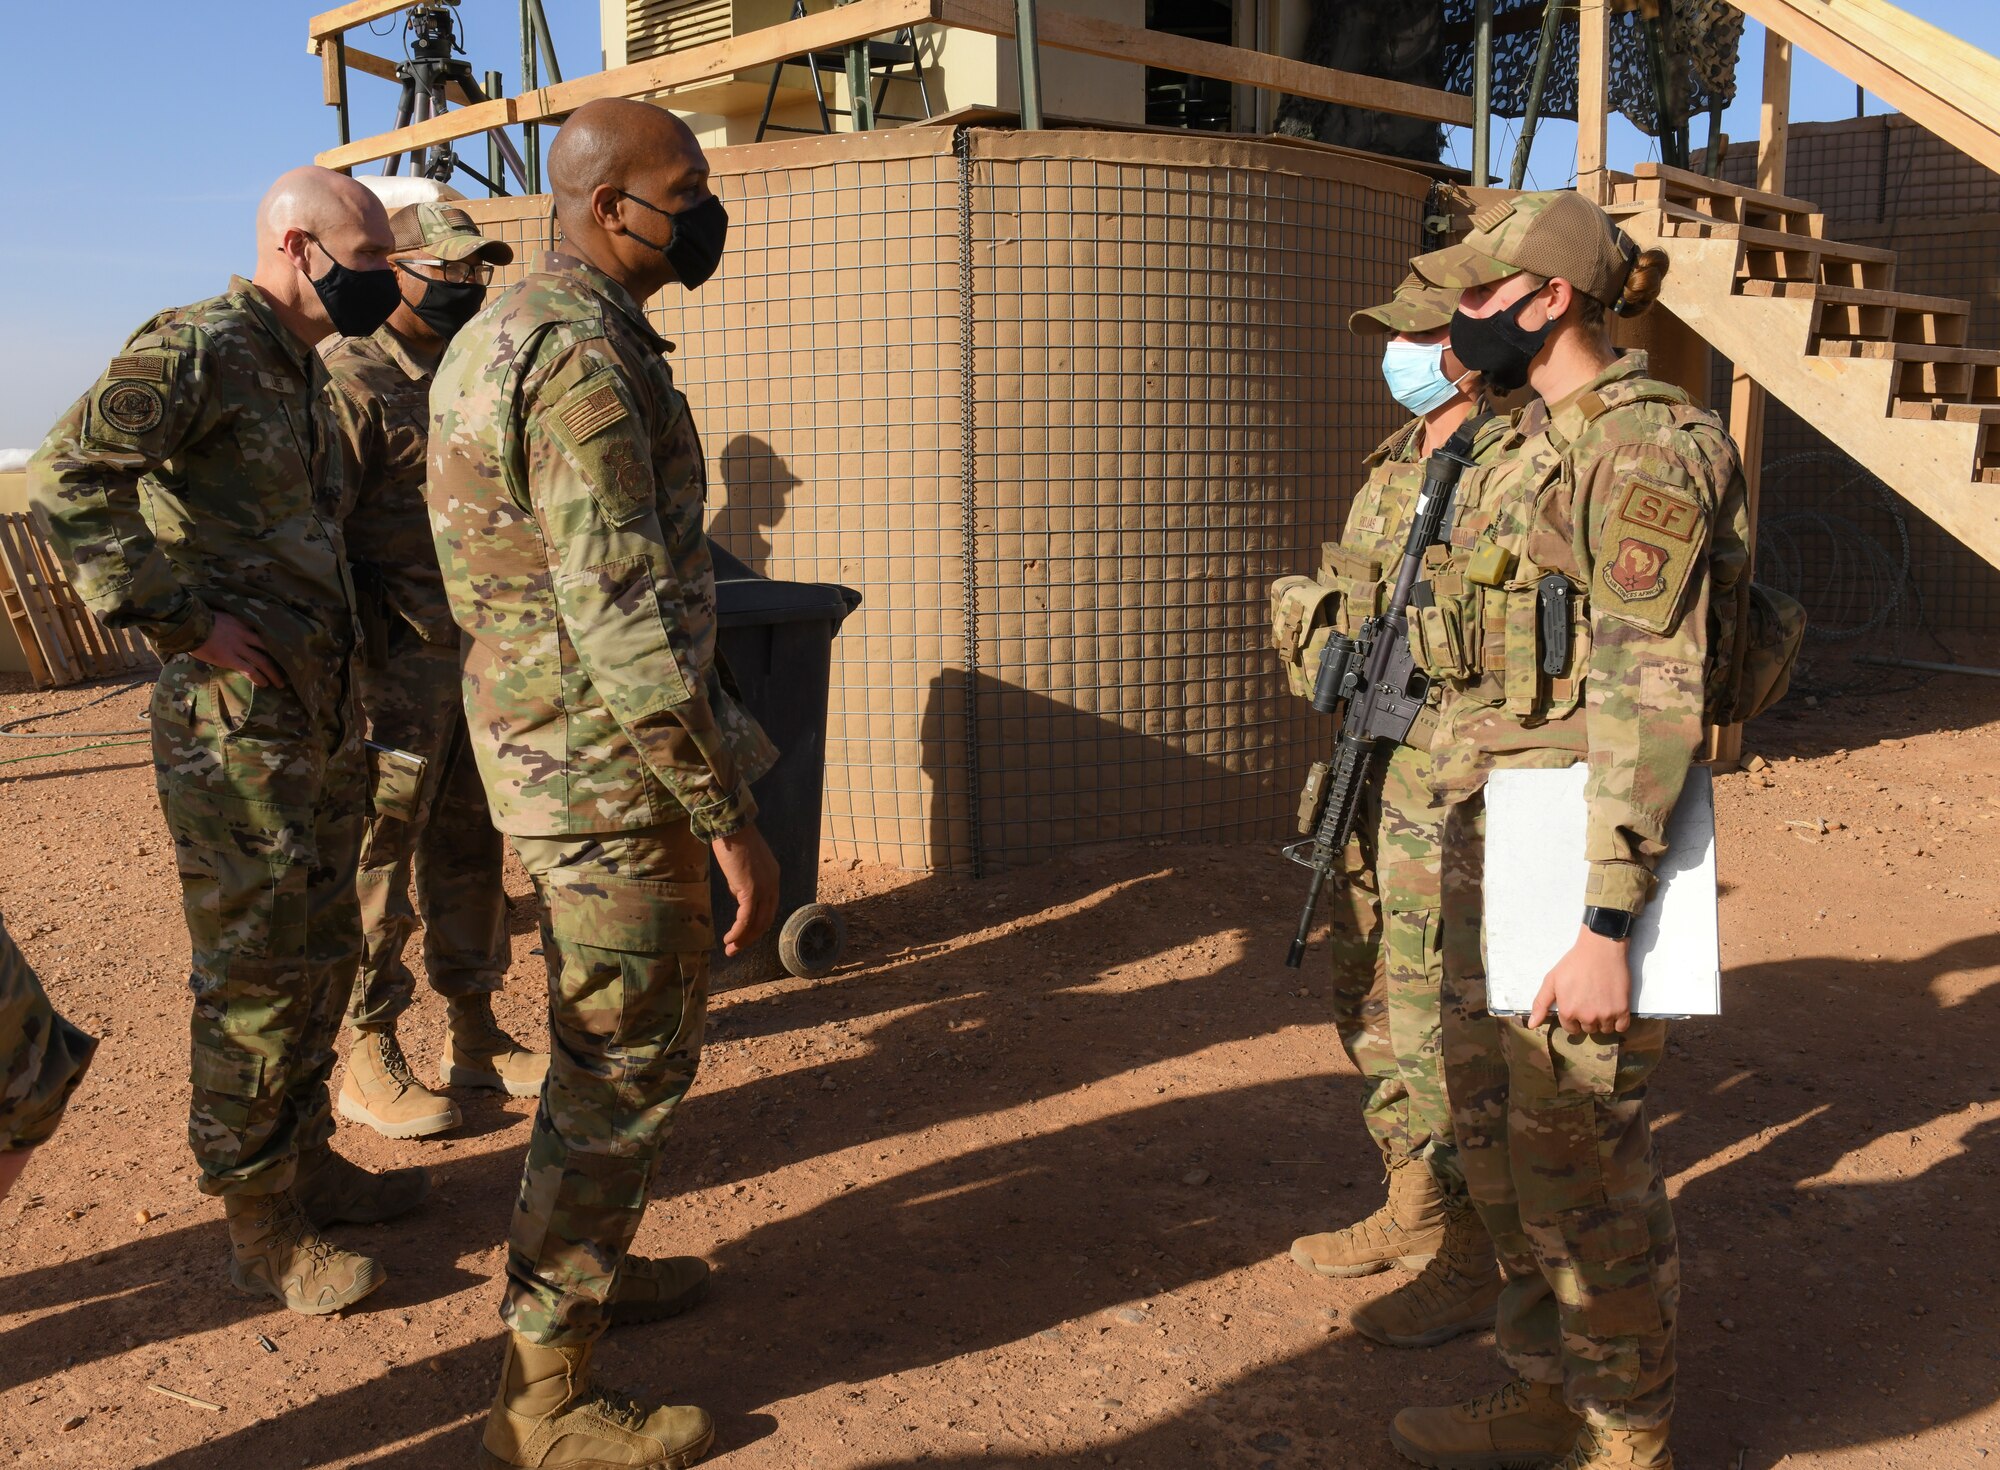 U.S. Air Force Brig. Gen. Roy W. Collins, Headquarters U.S. Air Force director of security forces and deputy chief of staff for logistics, engineering and force protection, speak with 409th Expeditionary Security Forces Squadron members during a visit to Nigerien Air Base 201, Agadez, Niger, Feb. 6, 2021. The 409 ESFS and the French Armees Nigeriennes work together to defend the base and its assets. (U.S. Air Force photo by Senior Airman Gabrielle Winn)